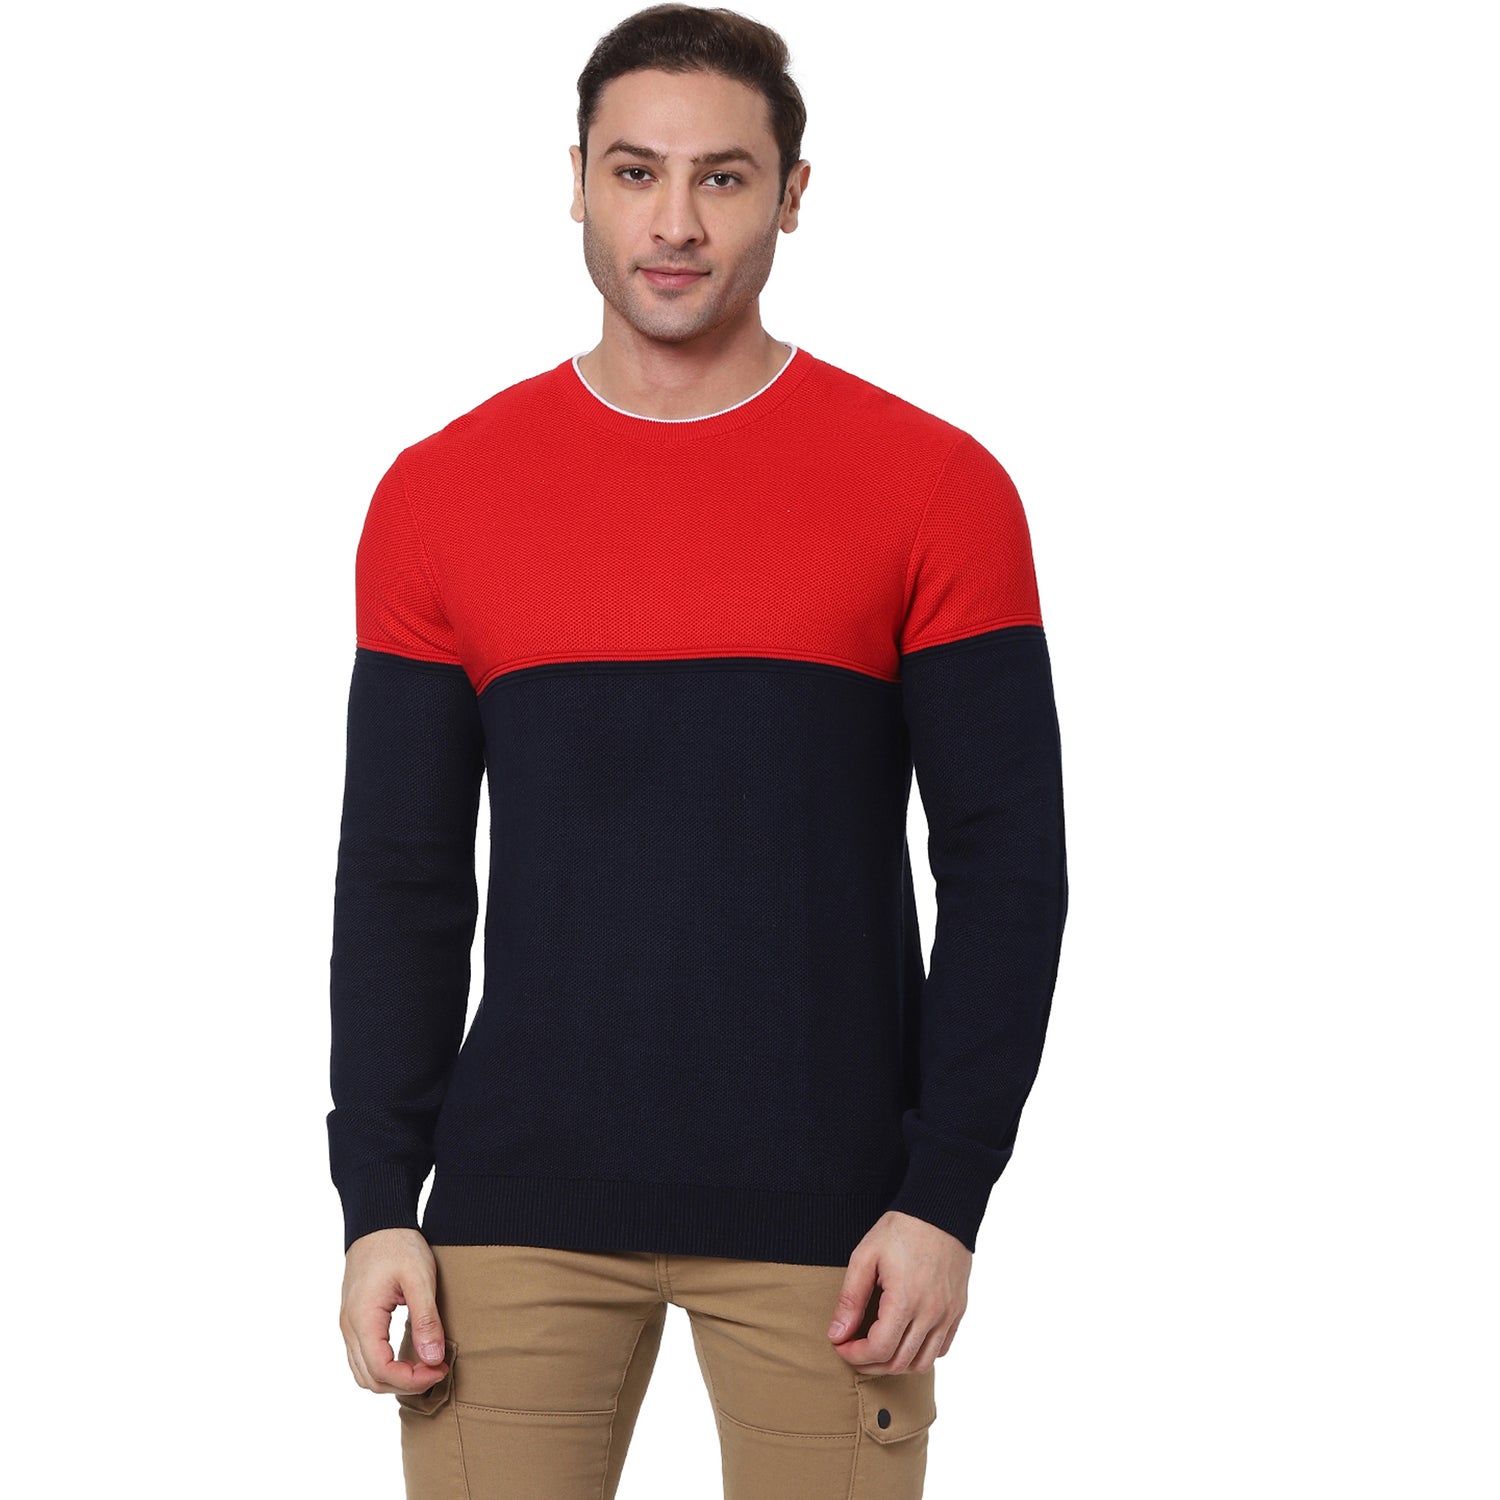 Navy Blue and Red Colourblocked Cotton Pullover Sweater (VEBLOCK)